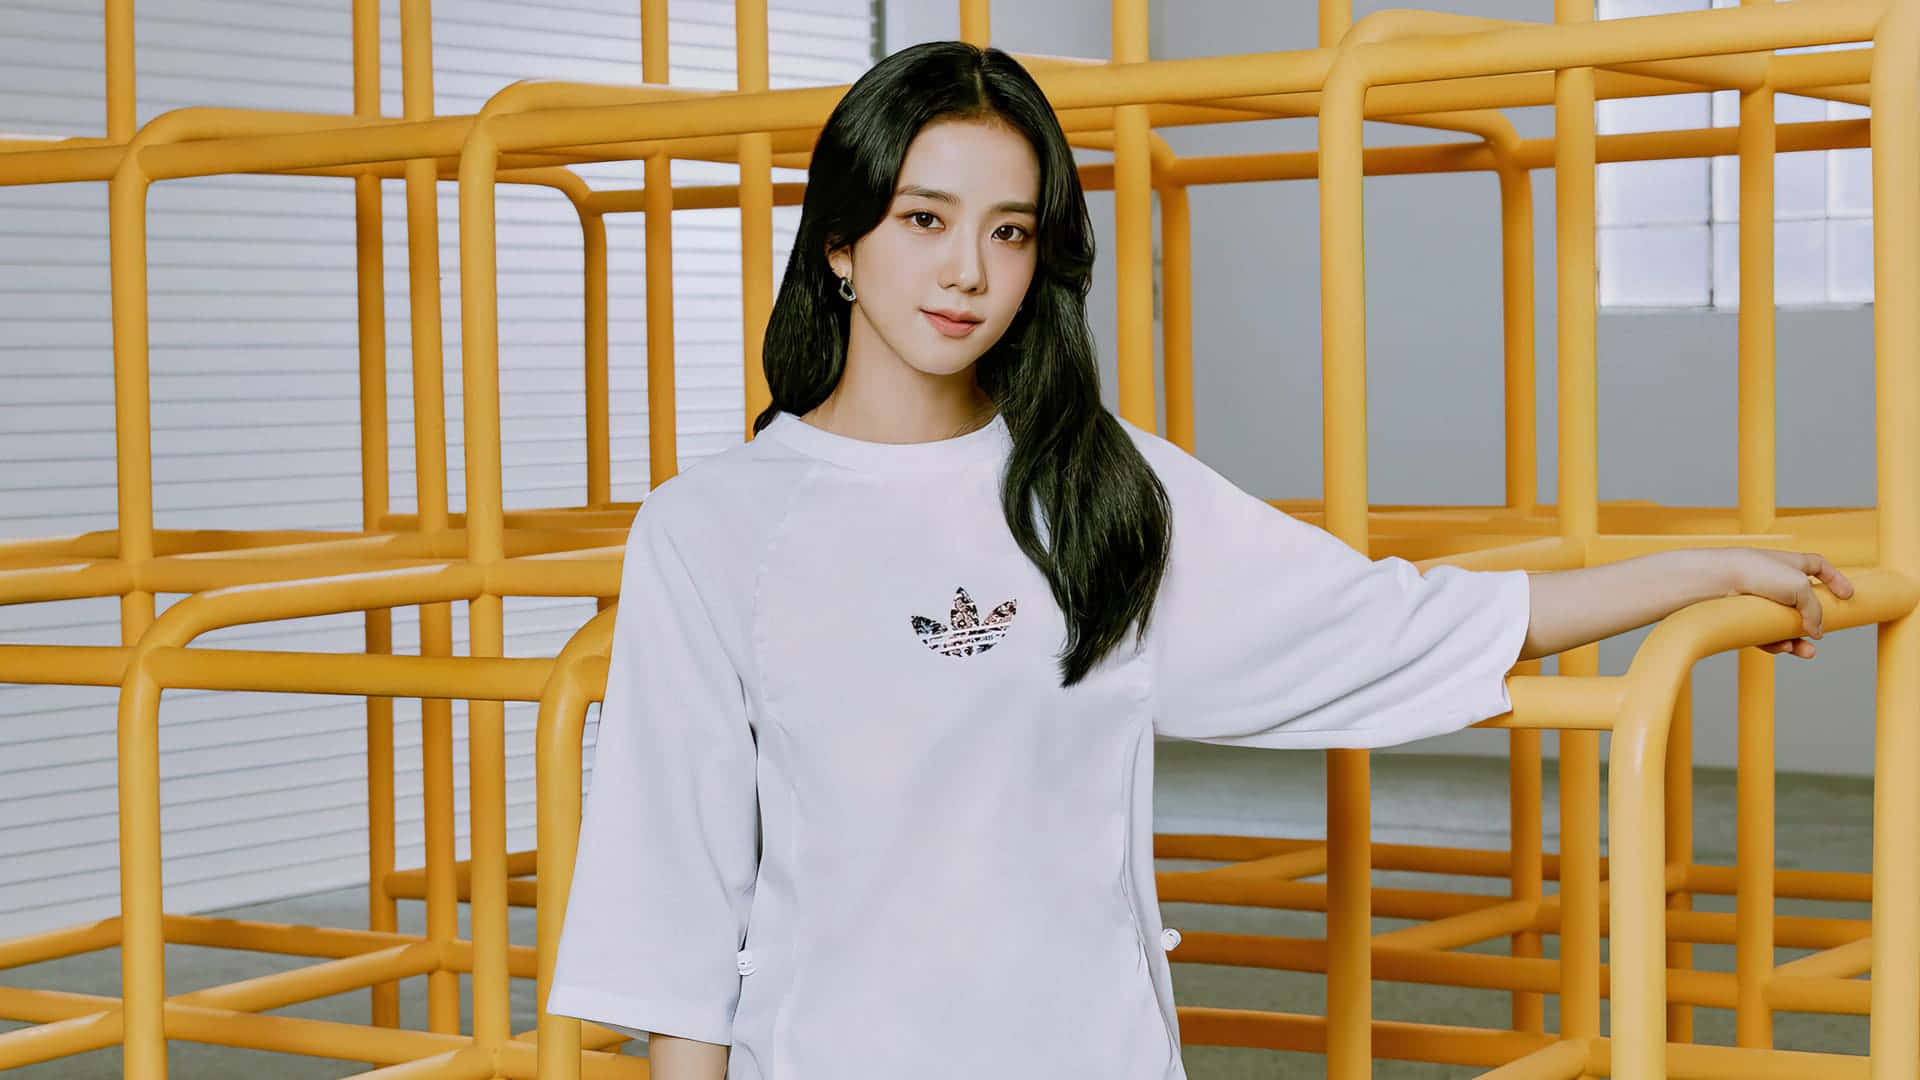 Jisoo of K-pop group BLACKPINK captivating fans with her mesmerizing beauty